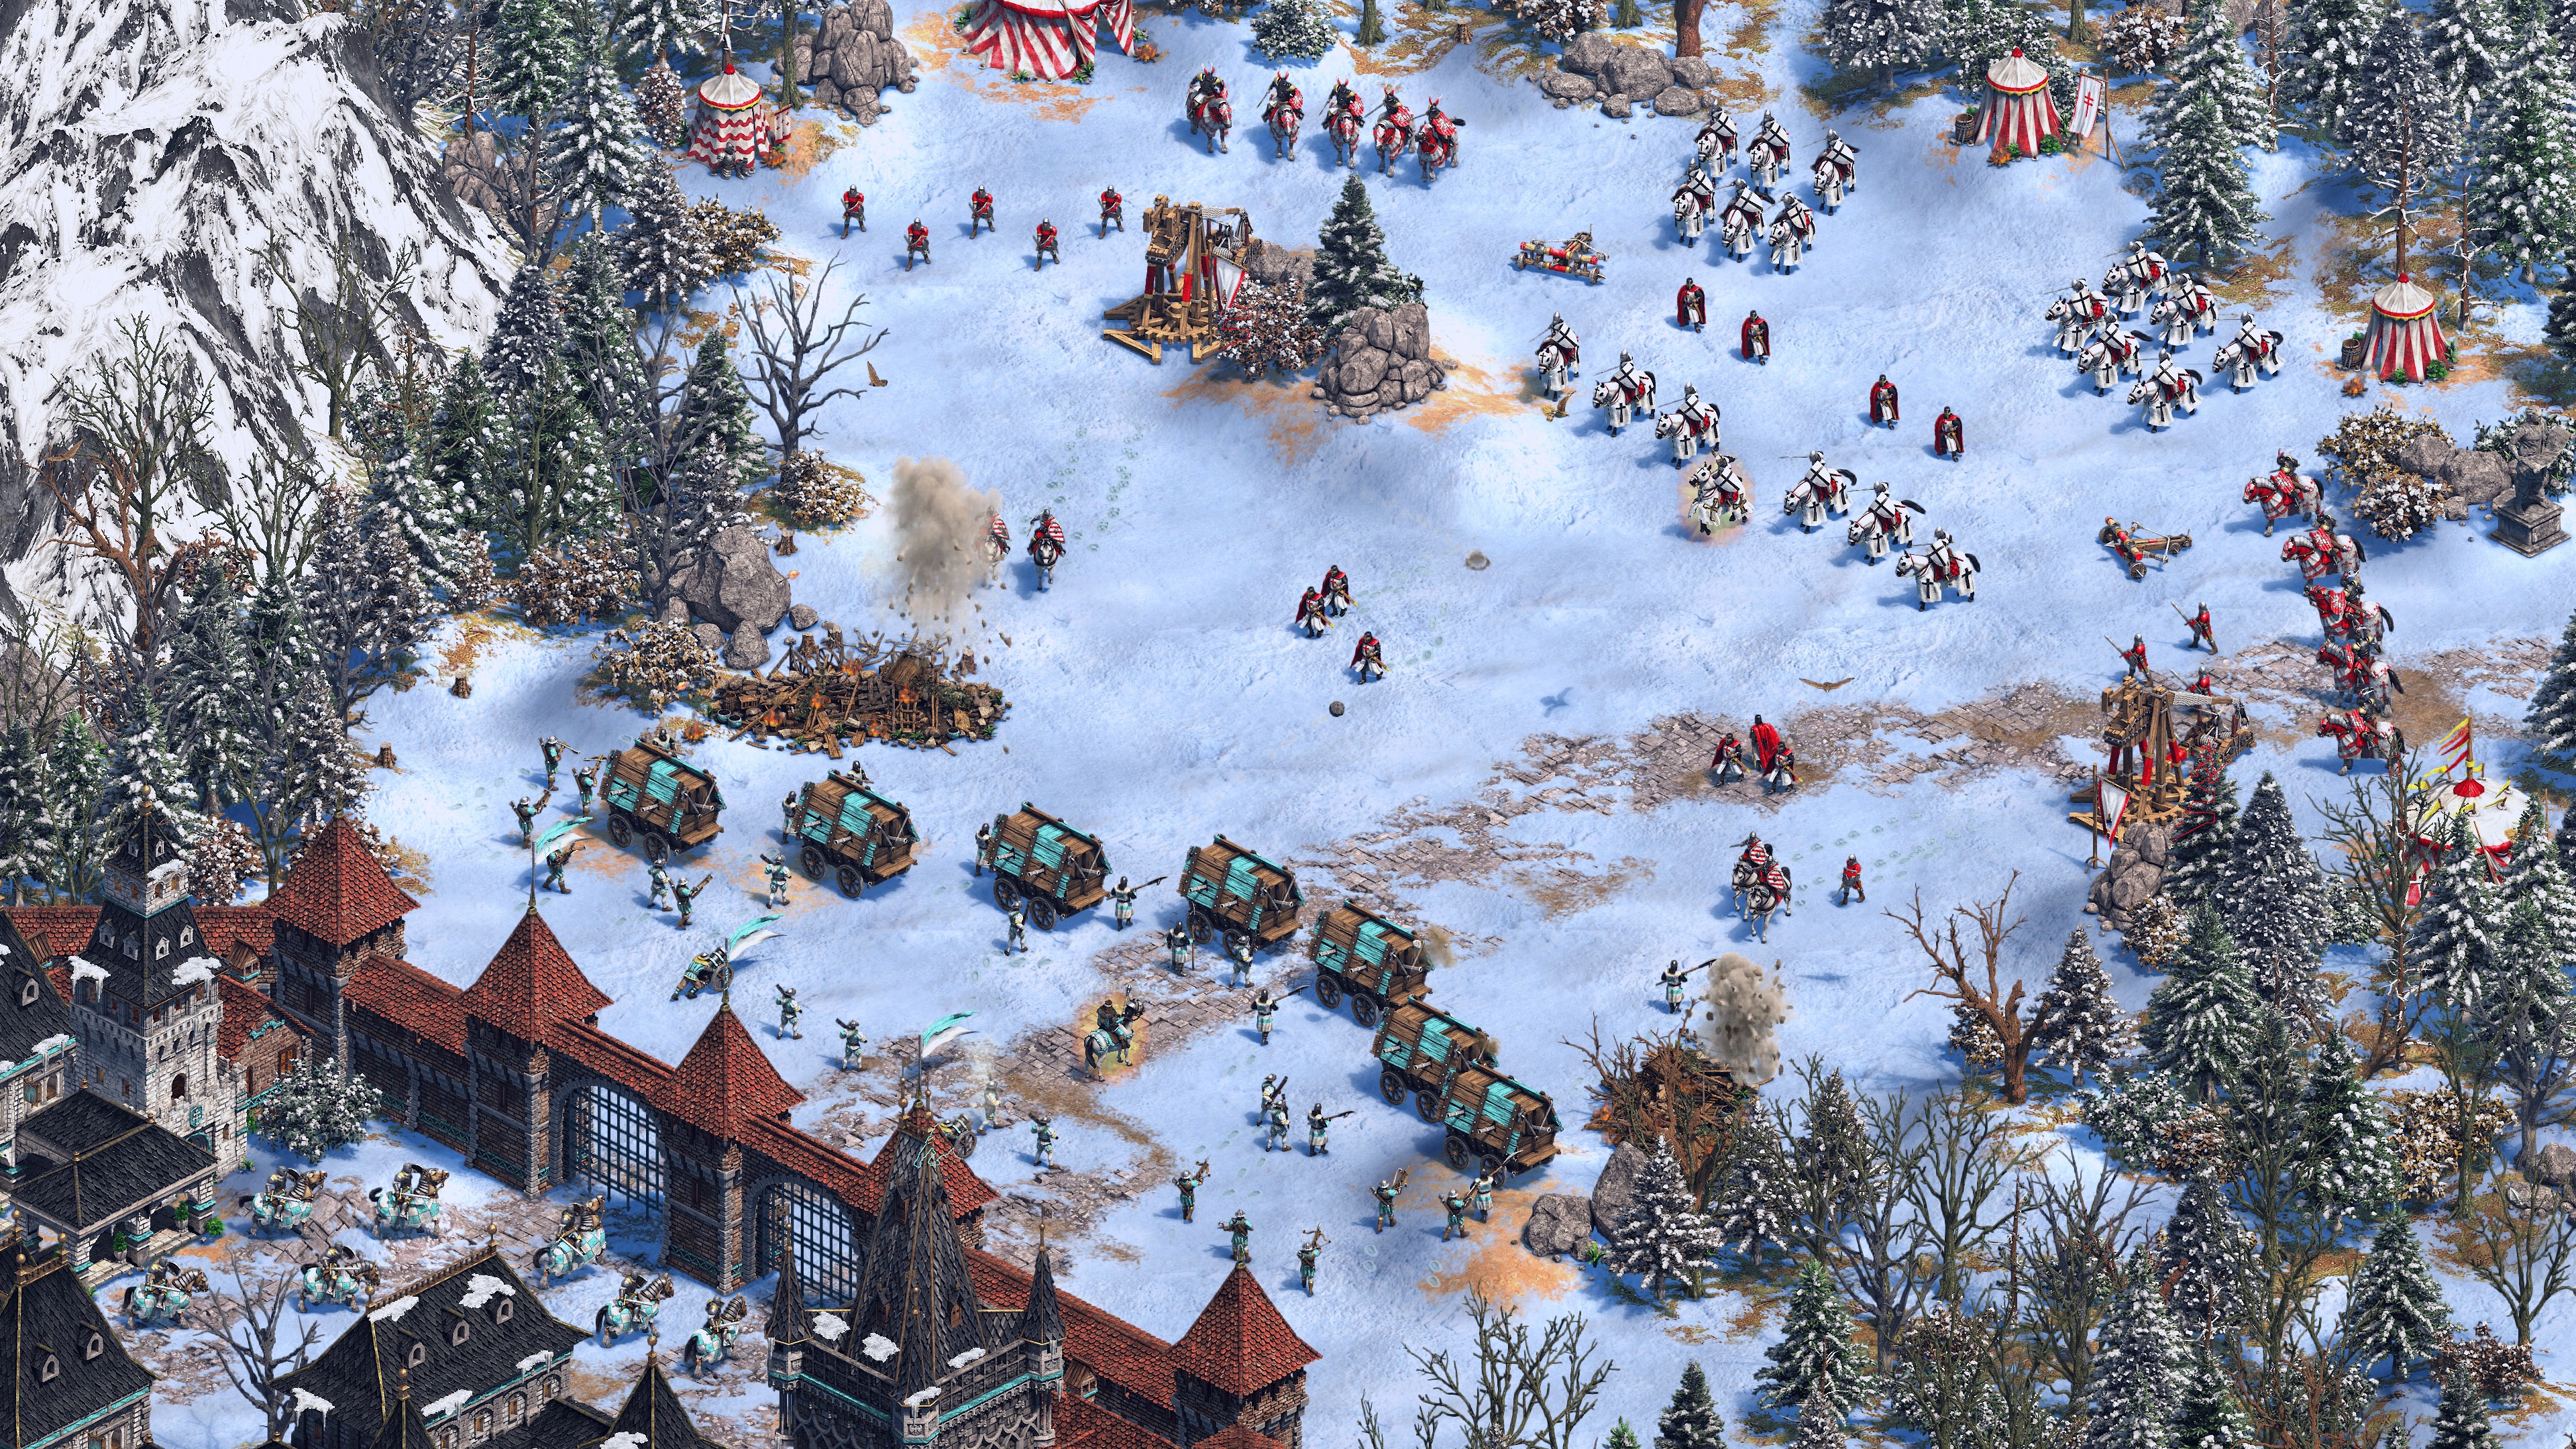 Age of Empires II: Definitive Edition - Dawn of the Dukes screenshot 52473